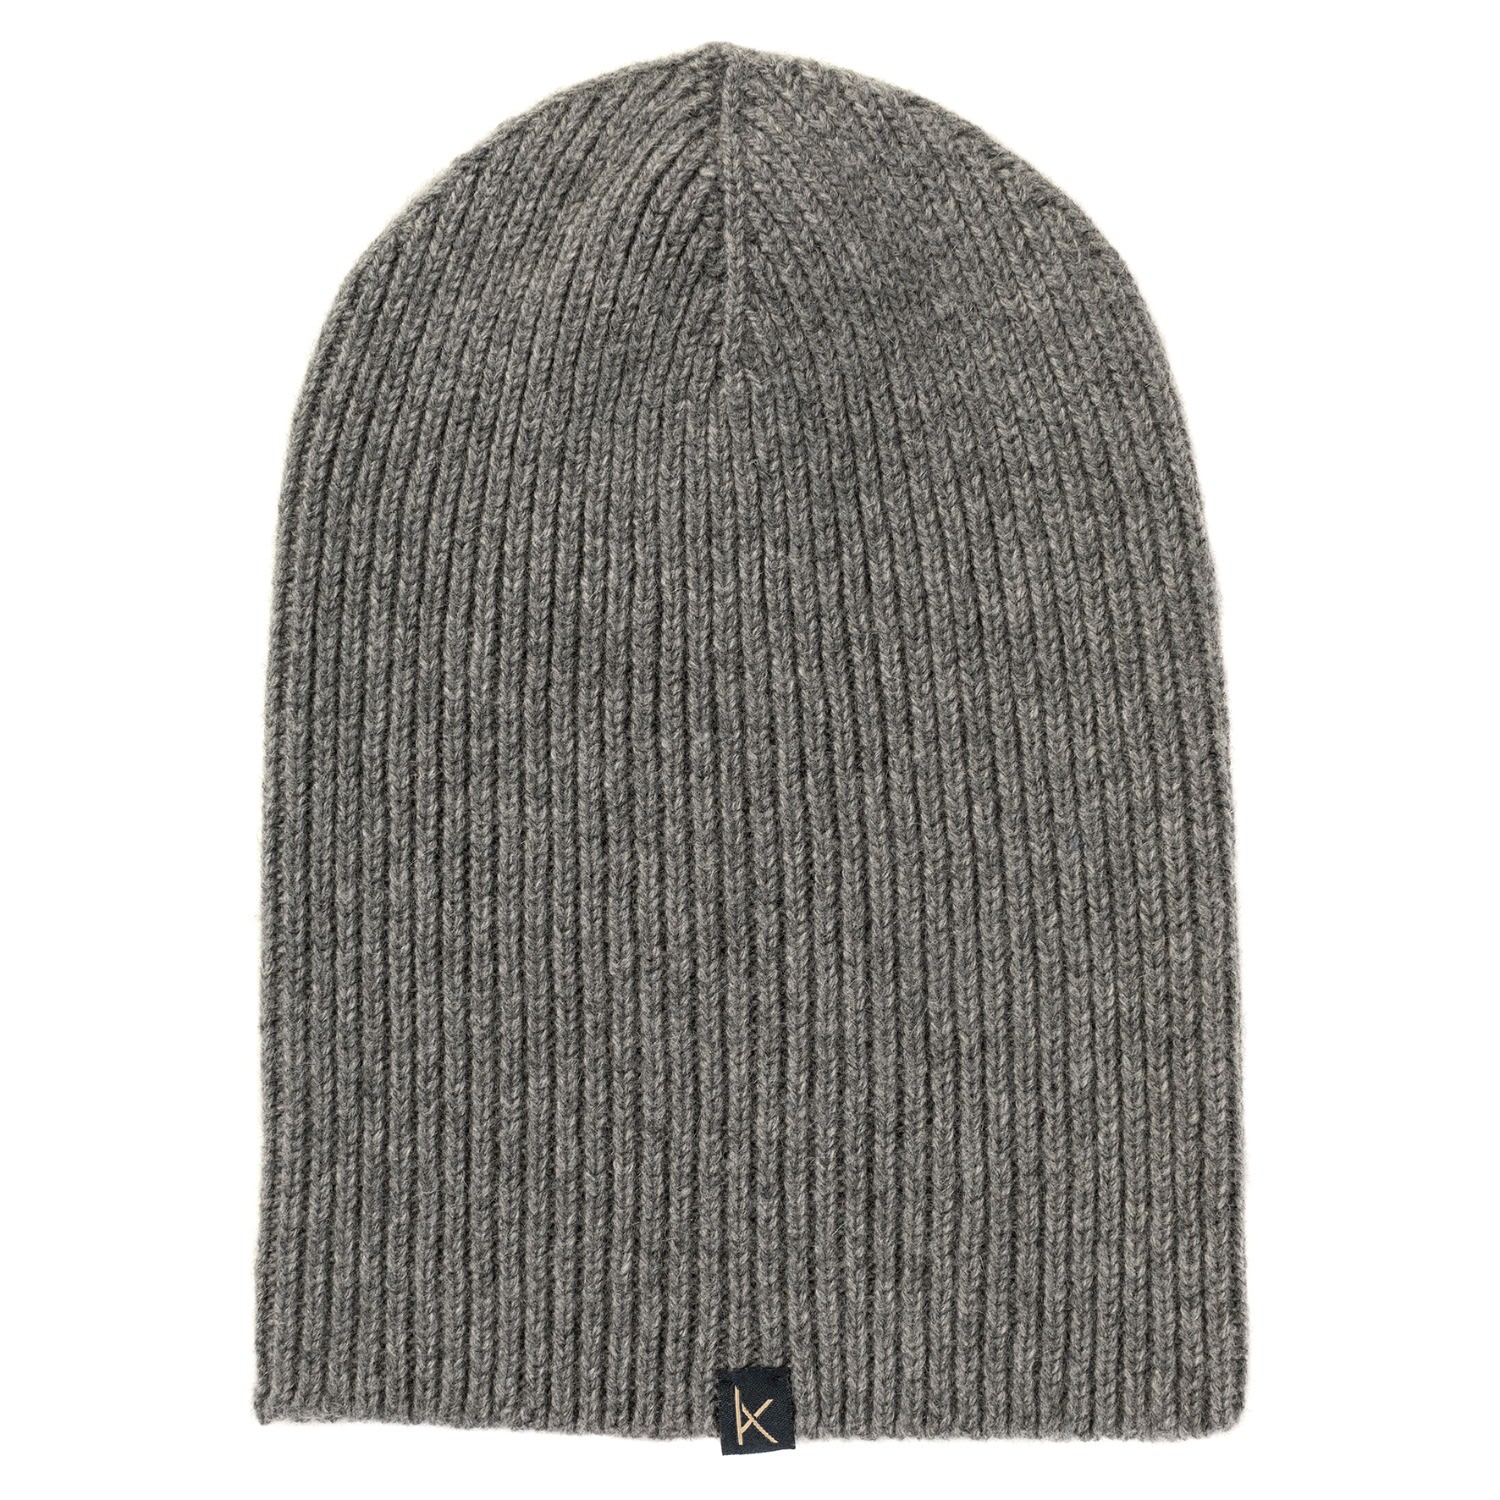 Men’s Mid Grey Deluxe Knitted Cashmere Beanie Hat Kinalba